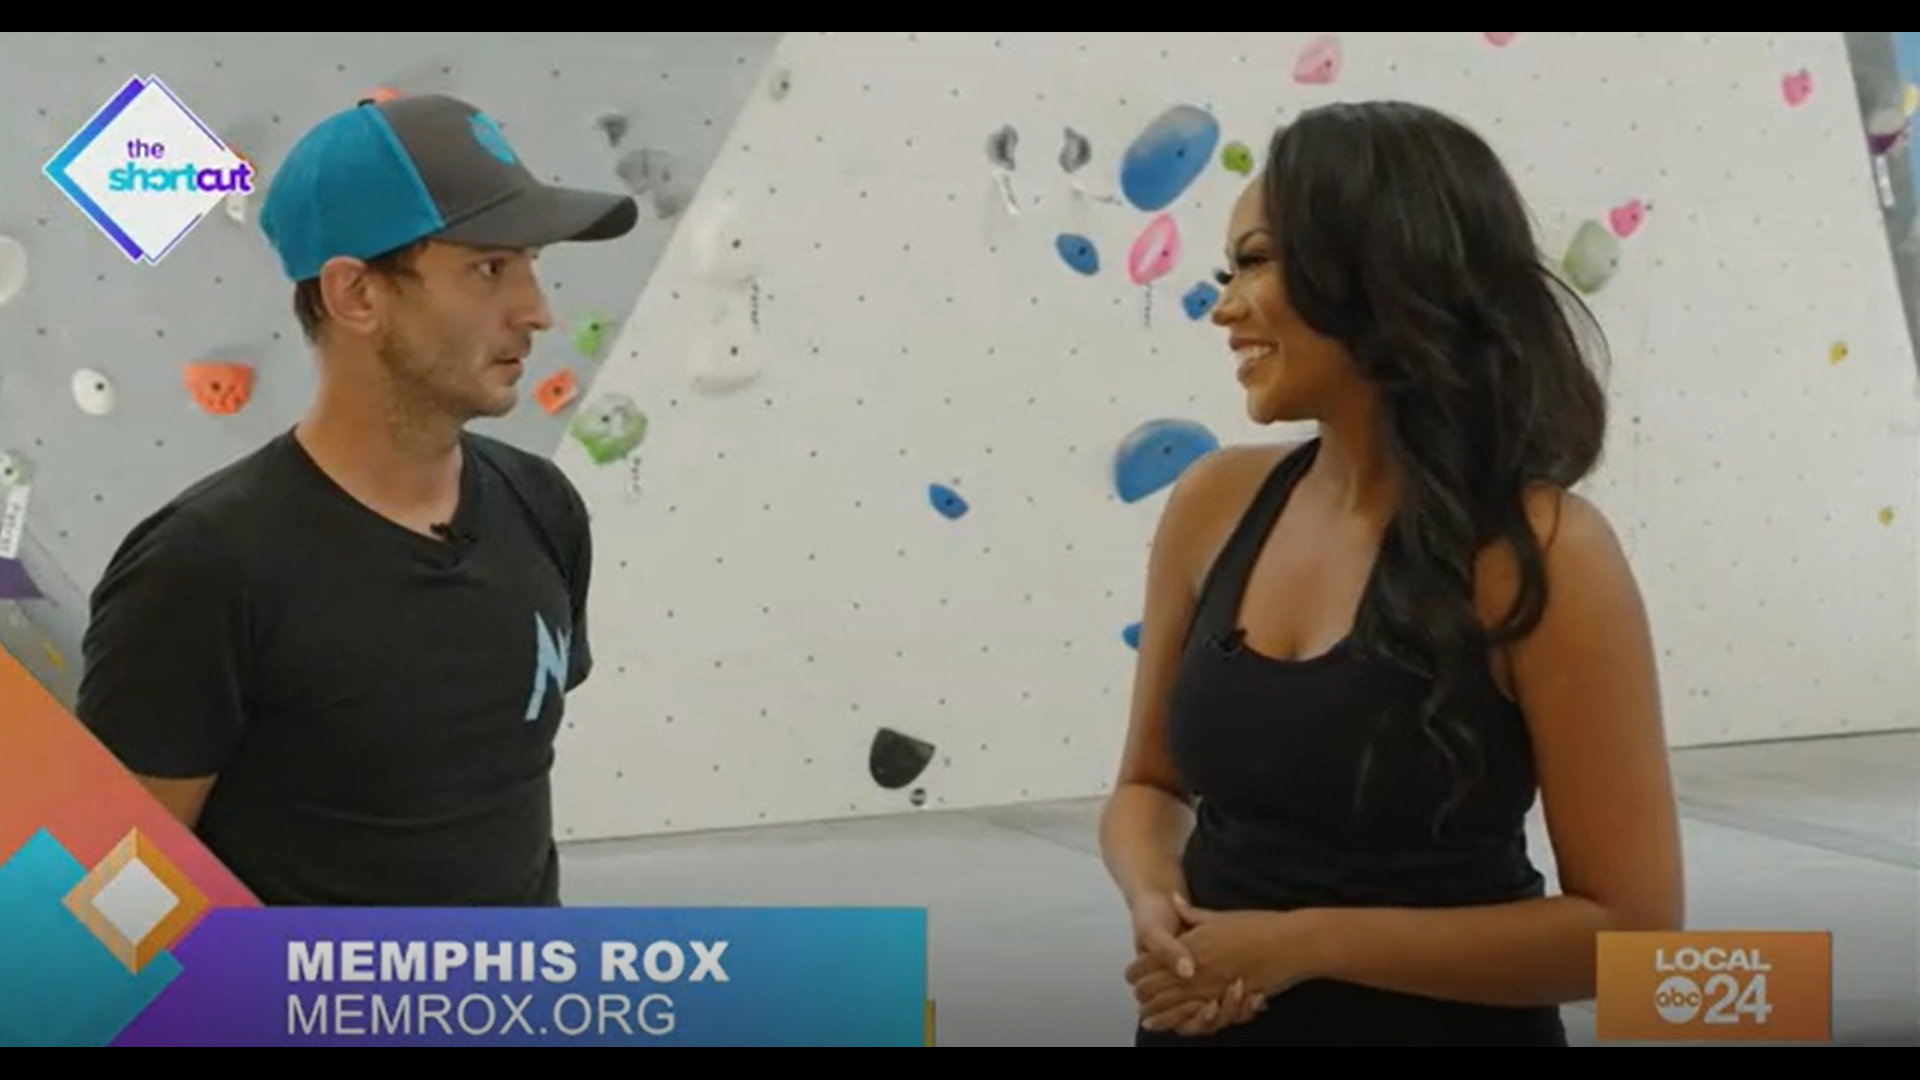 From its community gardens to its pay-what-you-can-model, Memphis Rox gives others the chance to try out rock-climbing while giving back to the community! Want more?